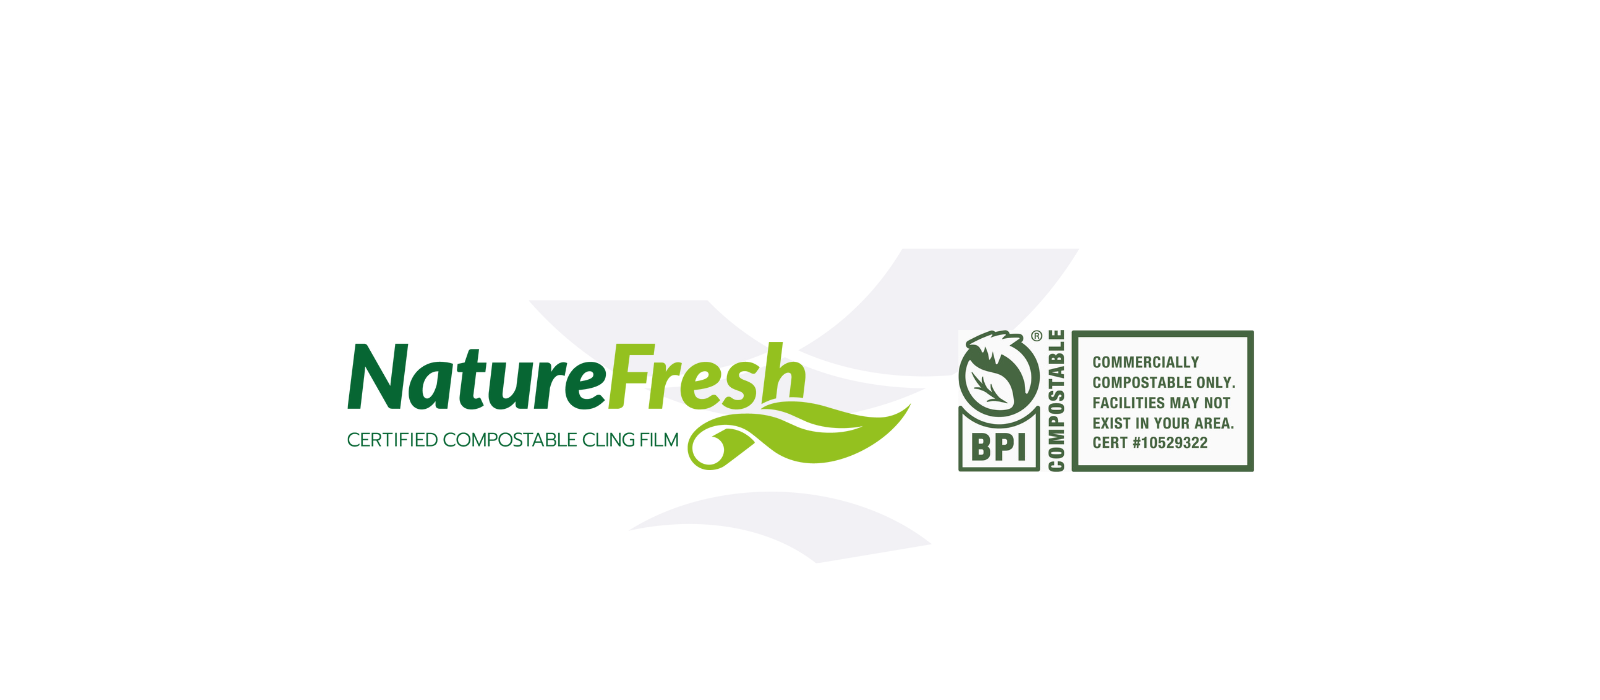 In North America, “BPI” Commercial Compostability Certification for Nature Fresh